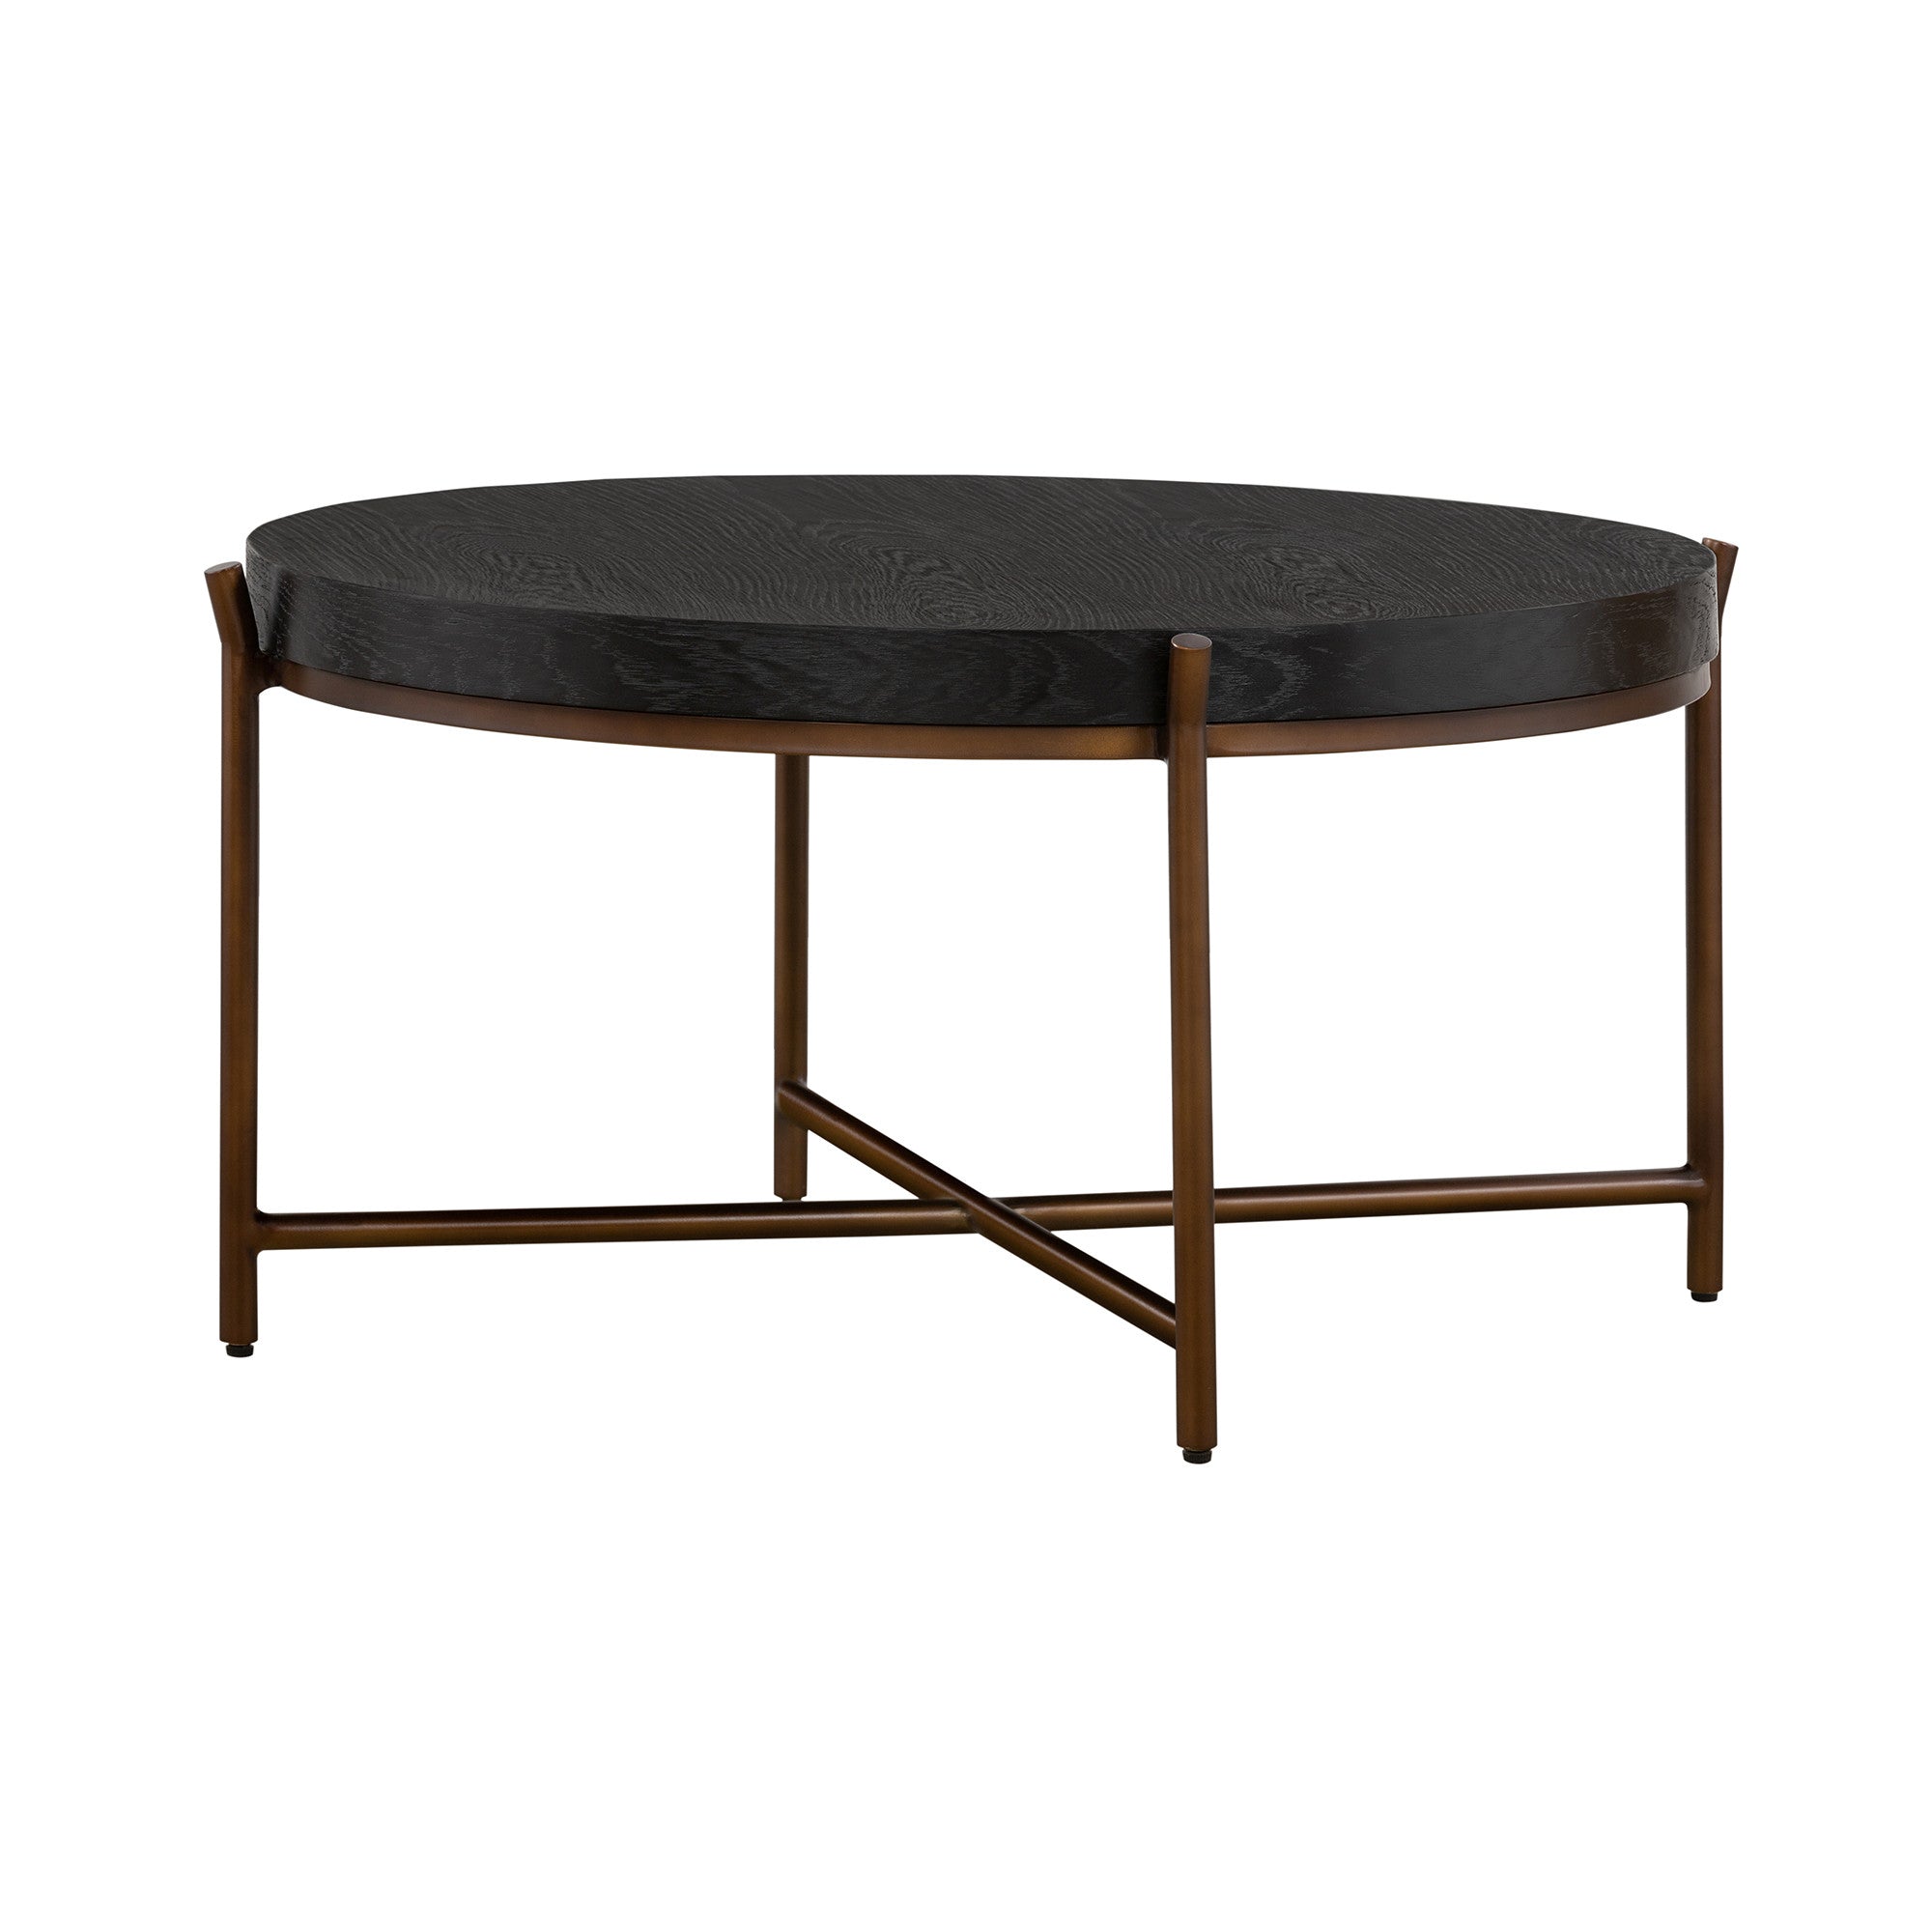 32" Black And Brown Solid Wood And Metal Round Coffee Table